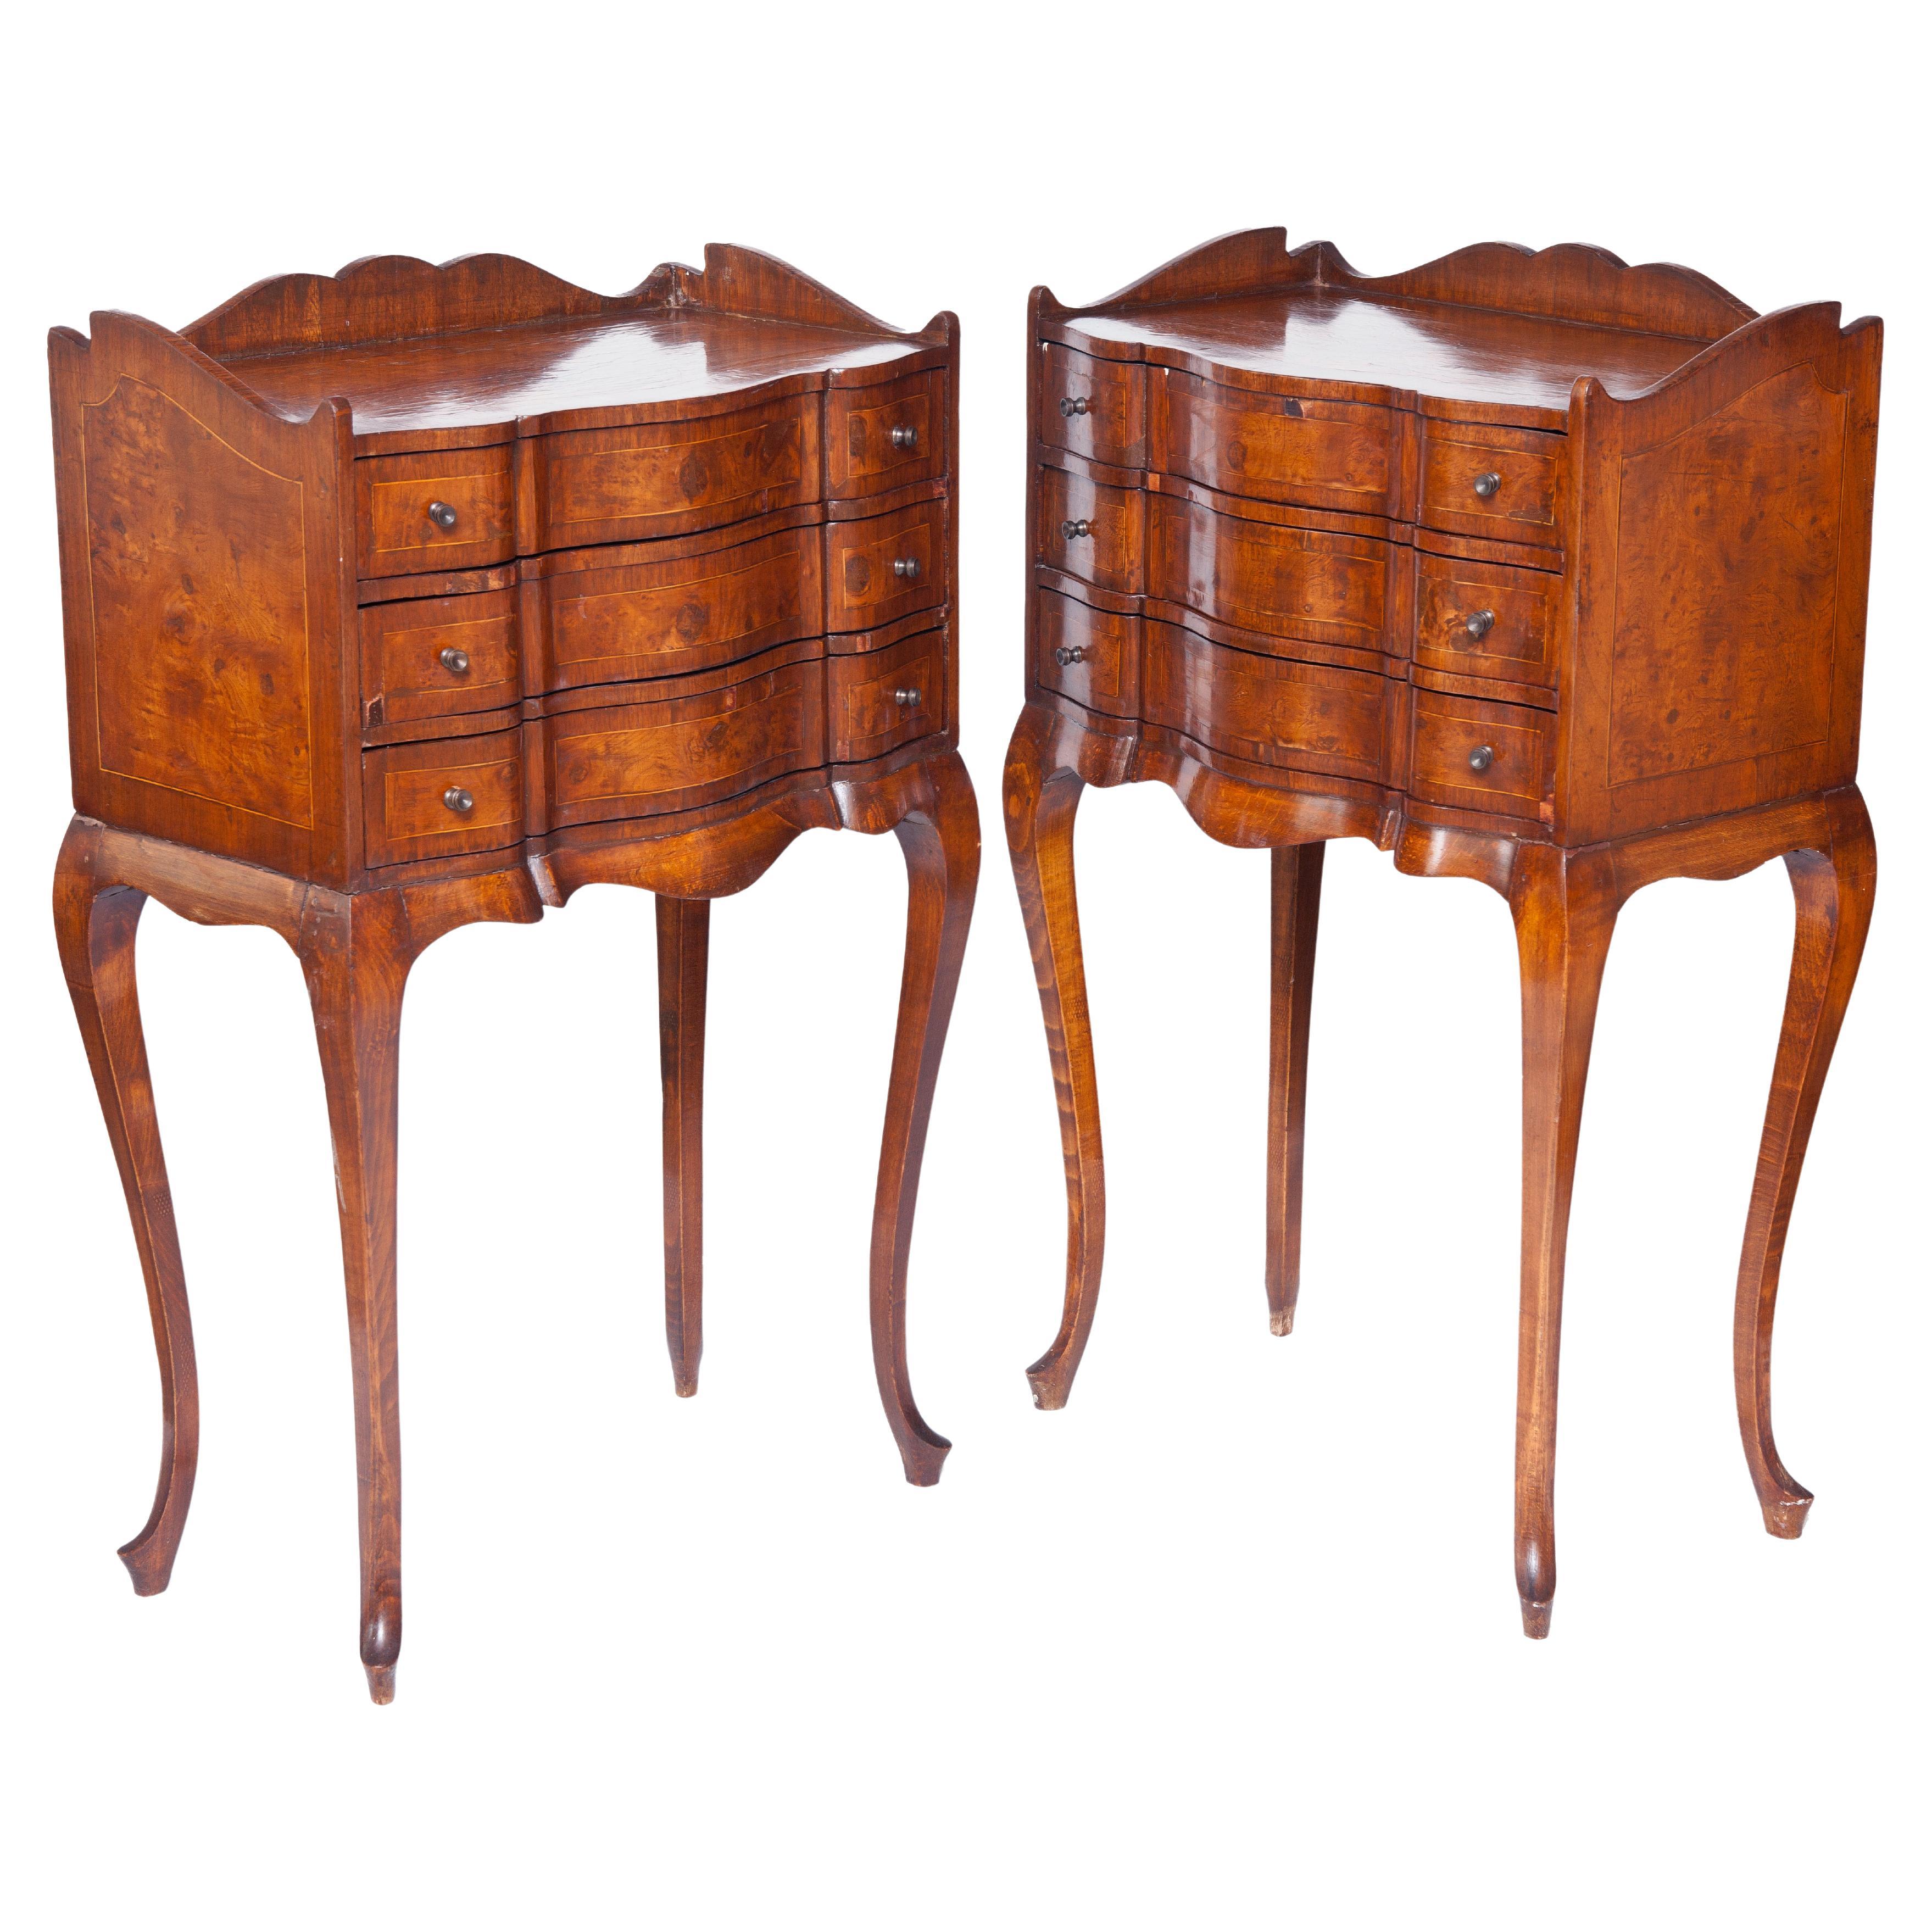 French Veneered Bedside Tables /Three Drawers & Glass Tops; a Pair